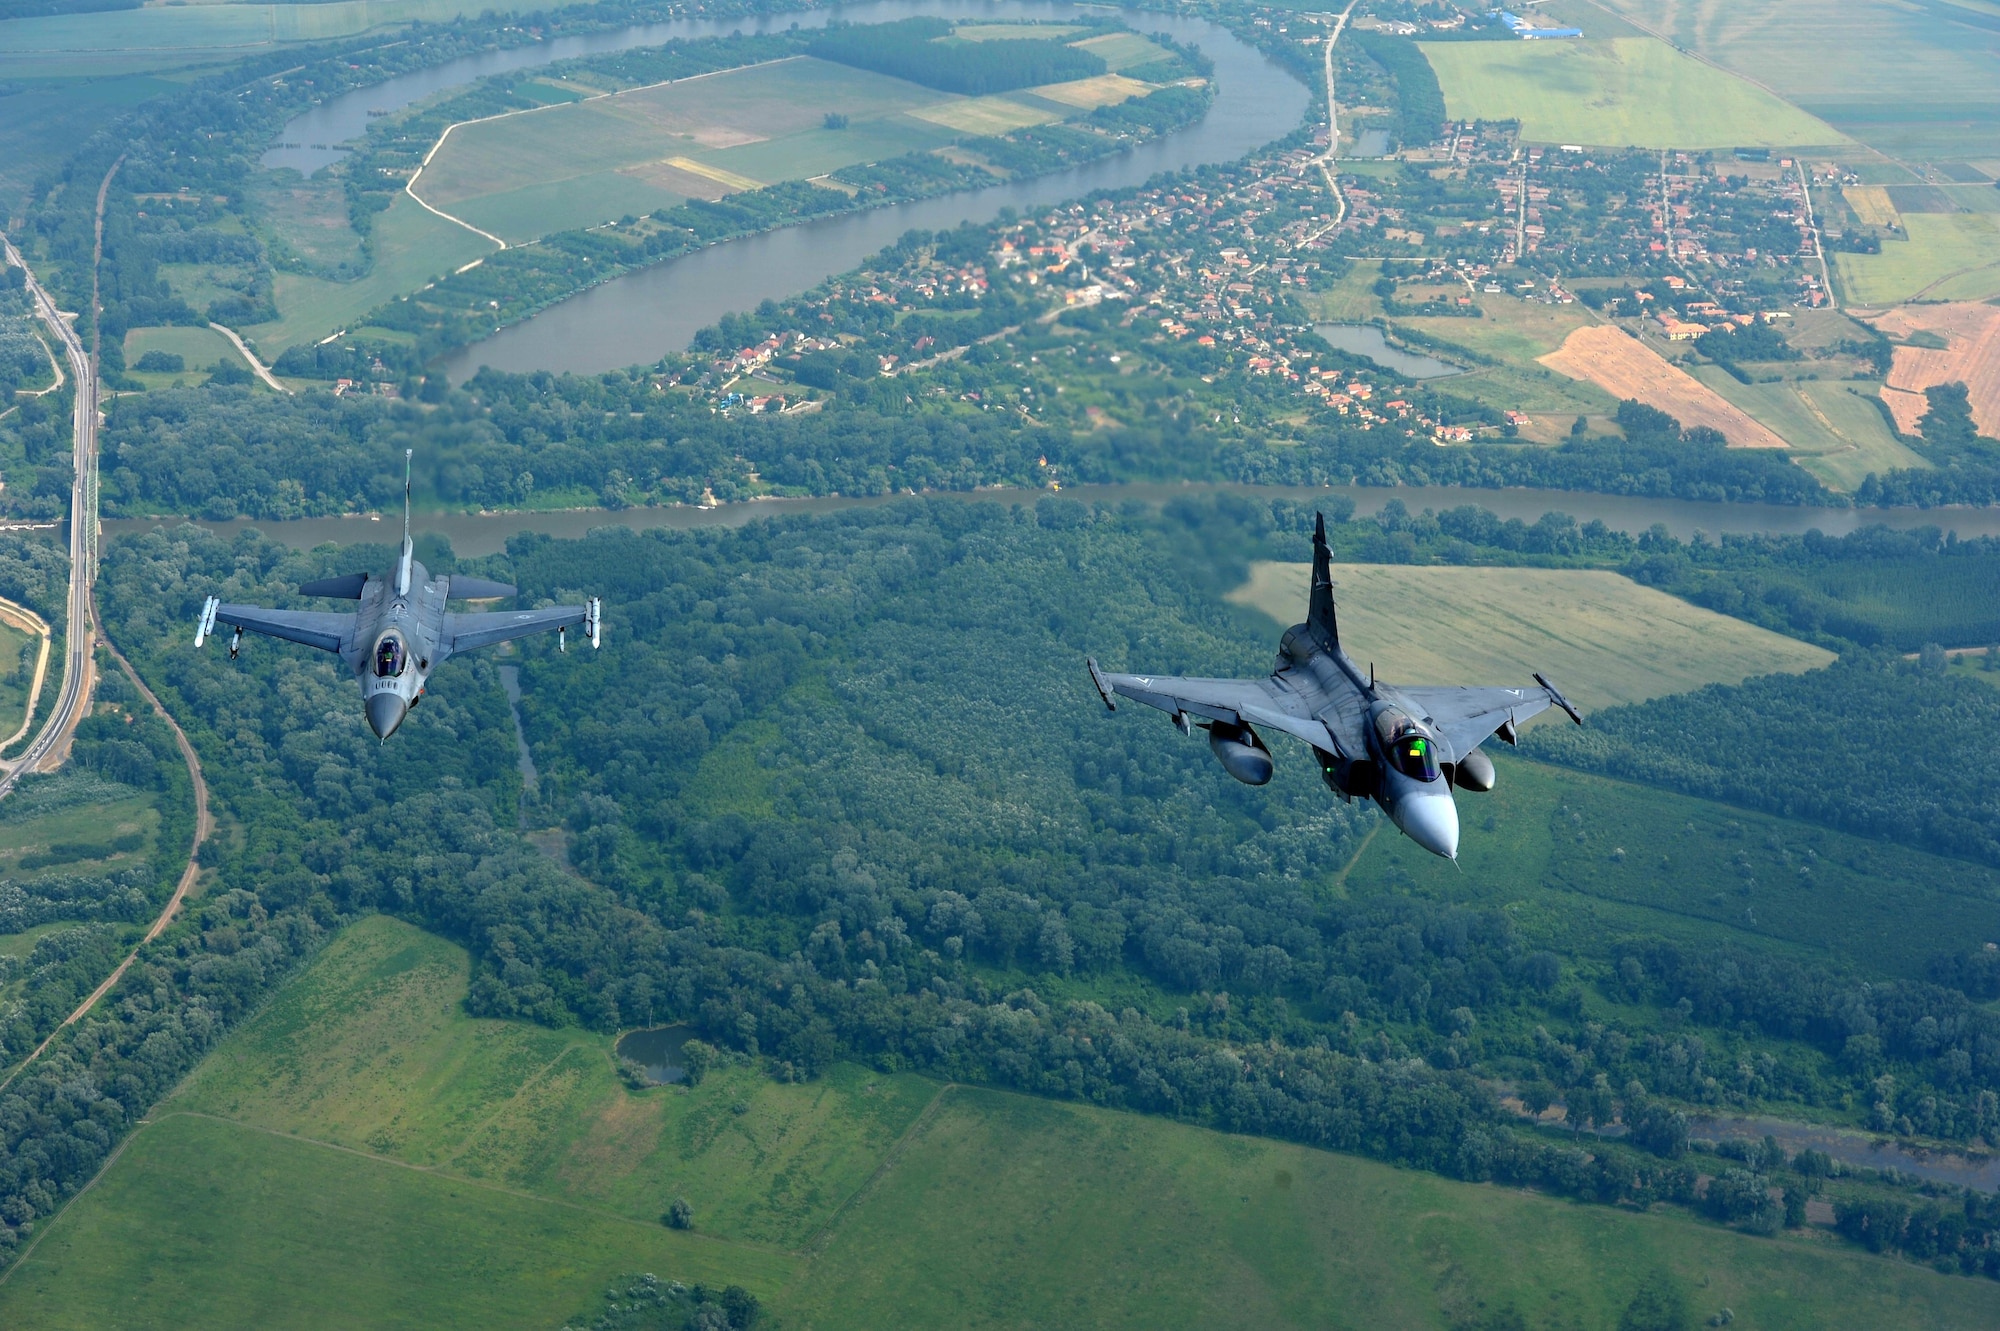 An F-16 Fighting Falcon assigned to the 180th Fighter Wing, Ohio Air National Guard, flies alongside a Hungarian JAS 39 Grippens during exercise Load Diffuser 17 at Kecskemet Air Base, Hungary, May 25, 2017. More than 150 Airmen from the 180FW and eight F-16s are participating in the Hungarian led, two week multinational exercise focused on enhancing interoperability capabilities and skills among NATO allied and European partner air forces by conducting joint operations and air defenses to maintain joint readiness, while also bolstering relationships within the U.S. Air National Guard’s State Partnership Program initiatives. Ohio became state partners with Hungary in 1993. Air National Guard photo by Senior Master Sgt. Beth Holliker.